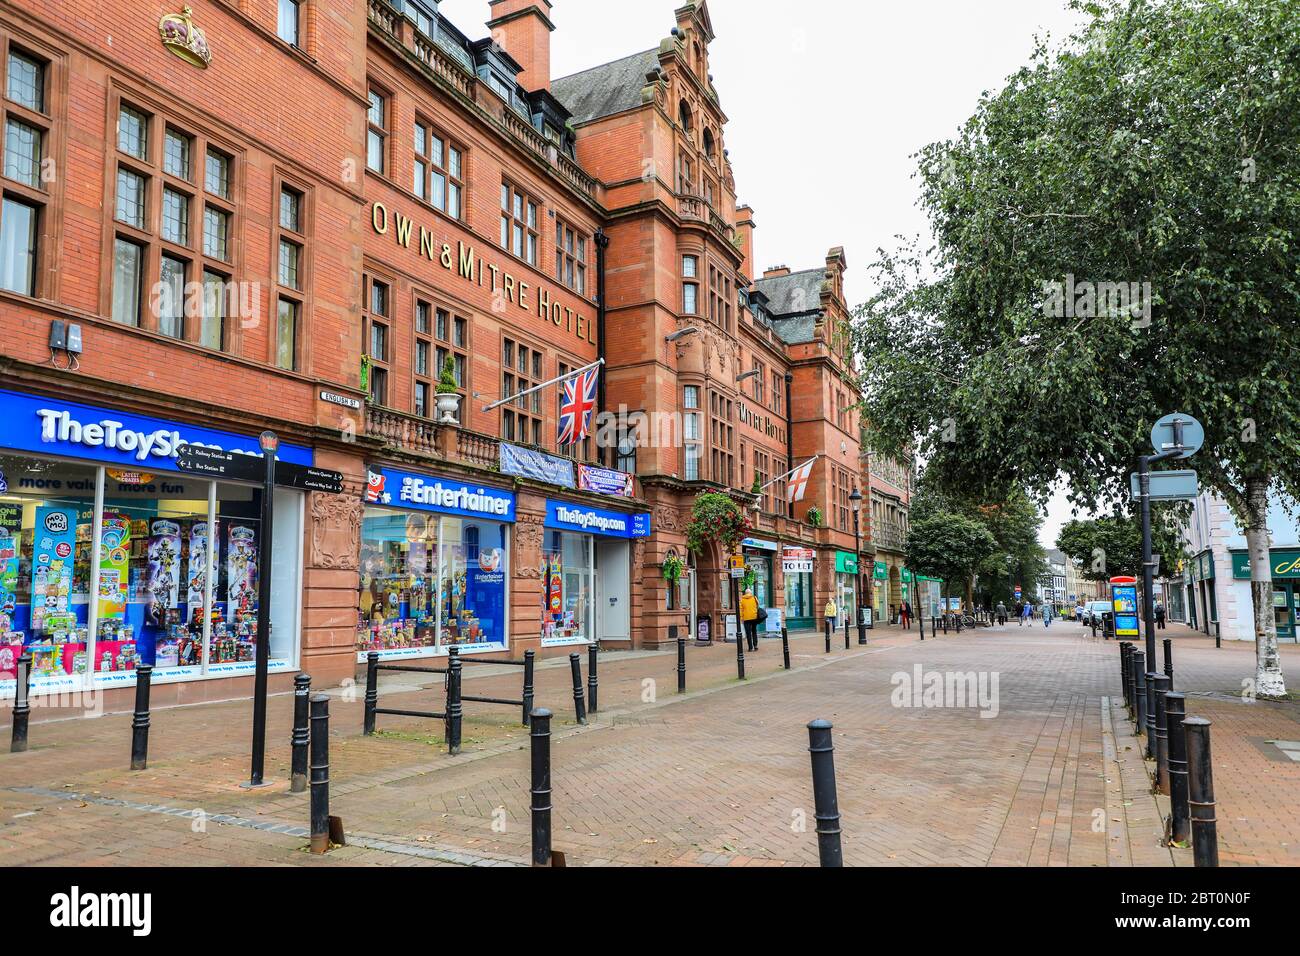 Crown & Mitre Hotel, English Street, in the town centre of Carlisle, Cumbria, England, UK Stock Photo